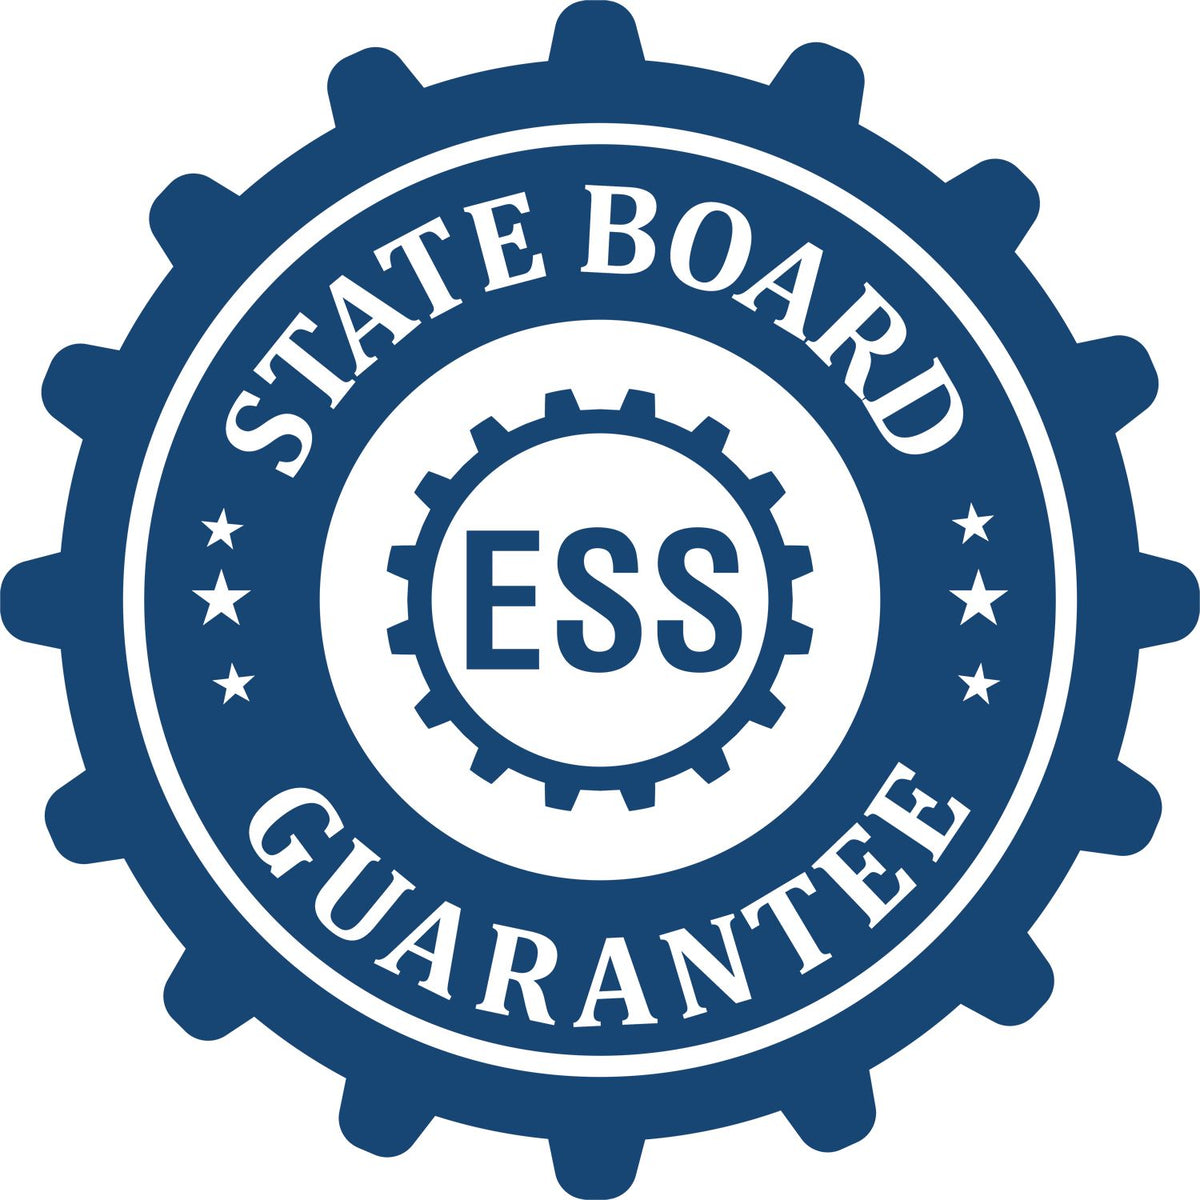 An emblem in a gear shape illustrating a state board guarantee for the State of Virginia Extended Long Reach Engineer Seal product.